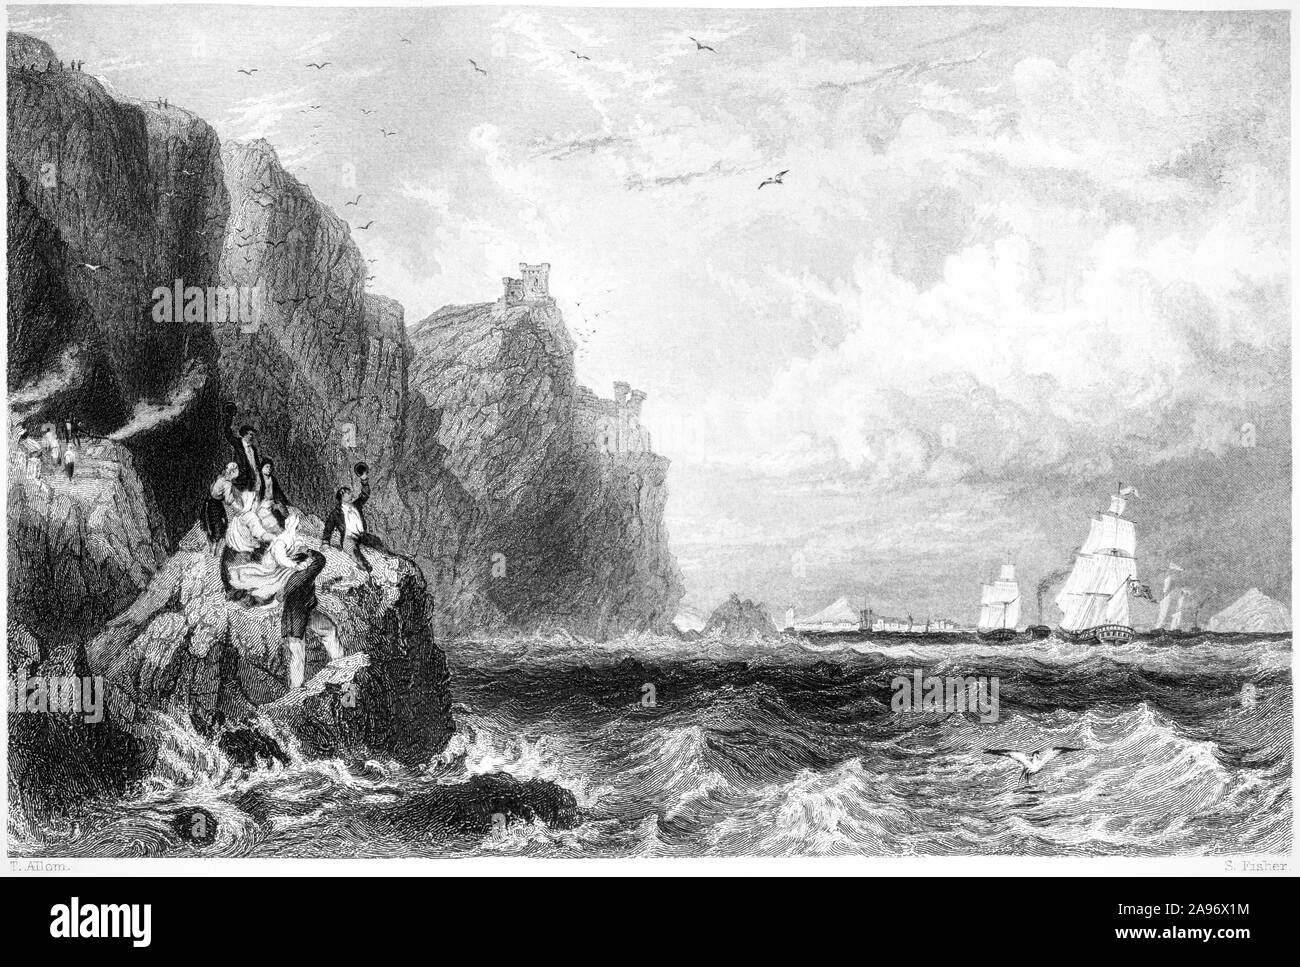 An engraving of Fast Castle, Berwickshire - The Royal Squadron Conveying His Majesty George IV towards Edinburgh scanned  from a book printed in 1859. Stock Photo